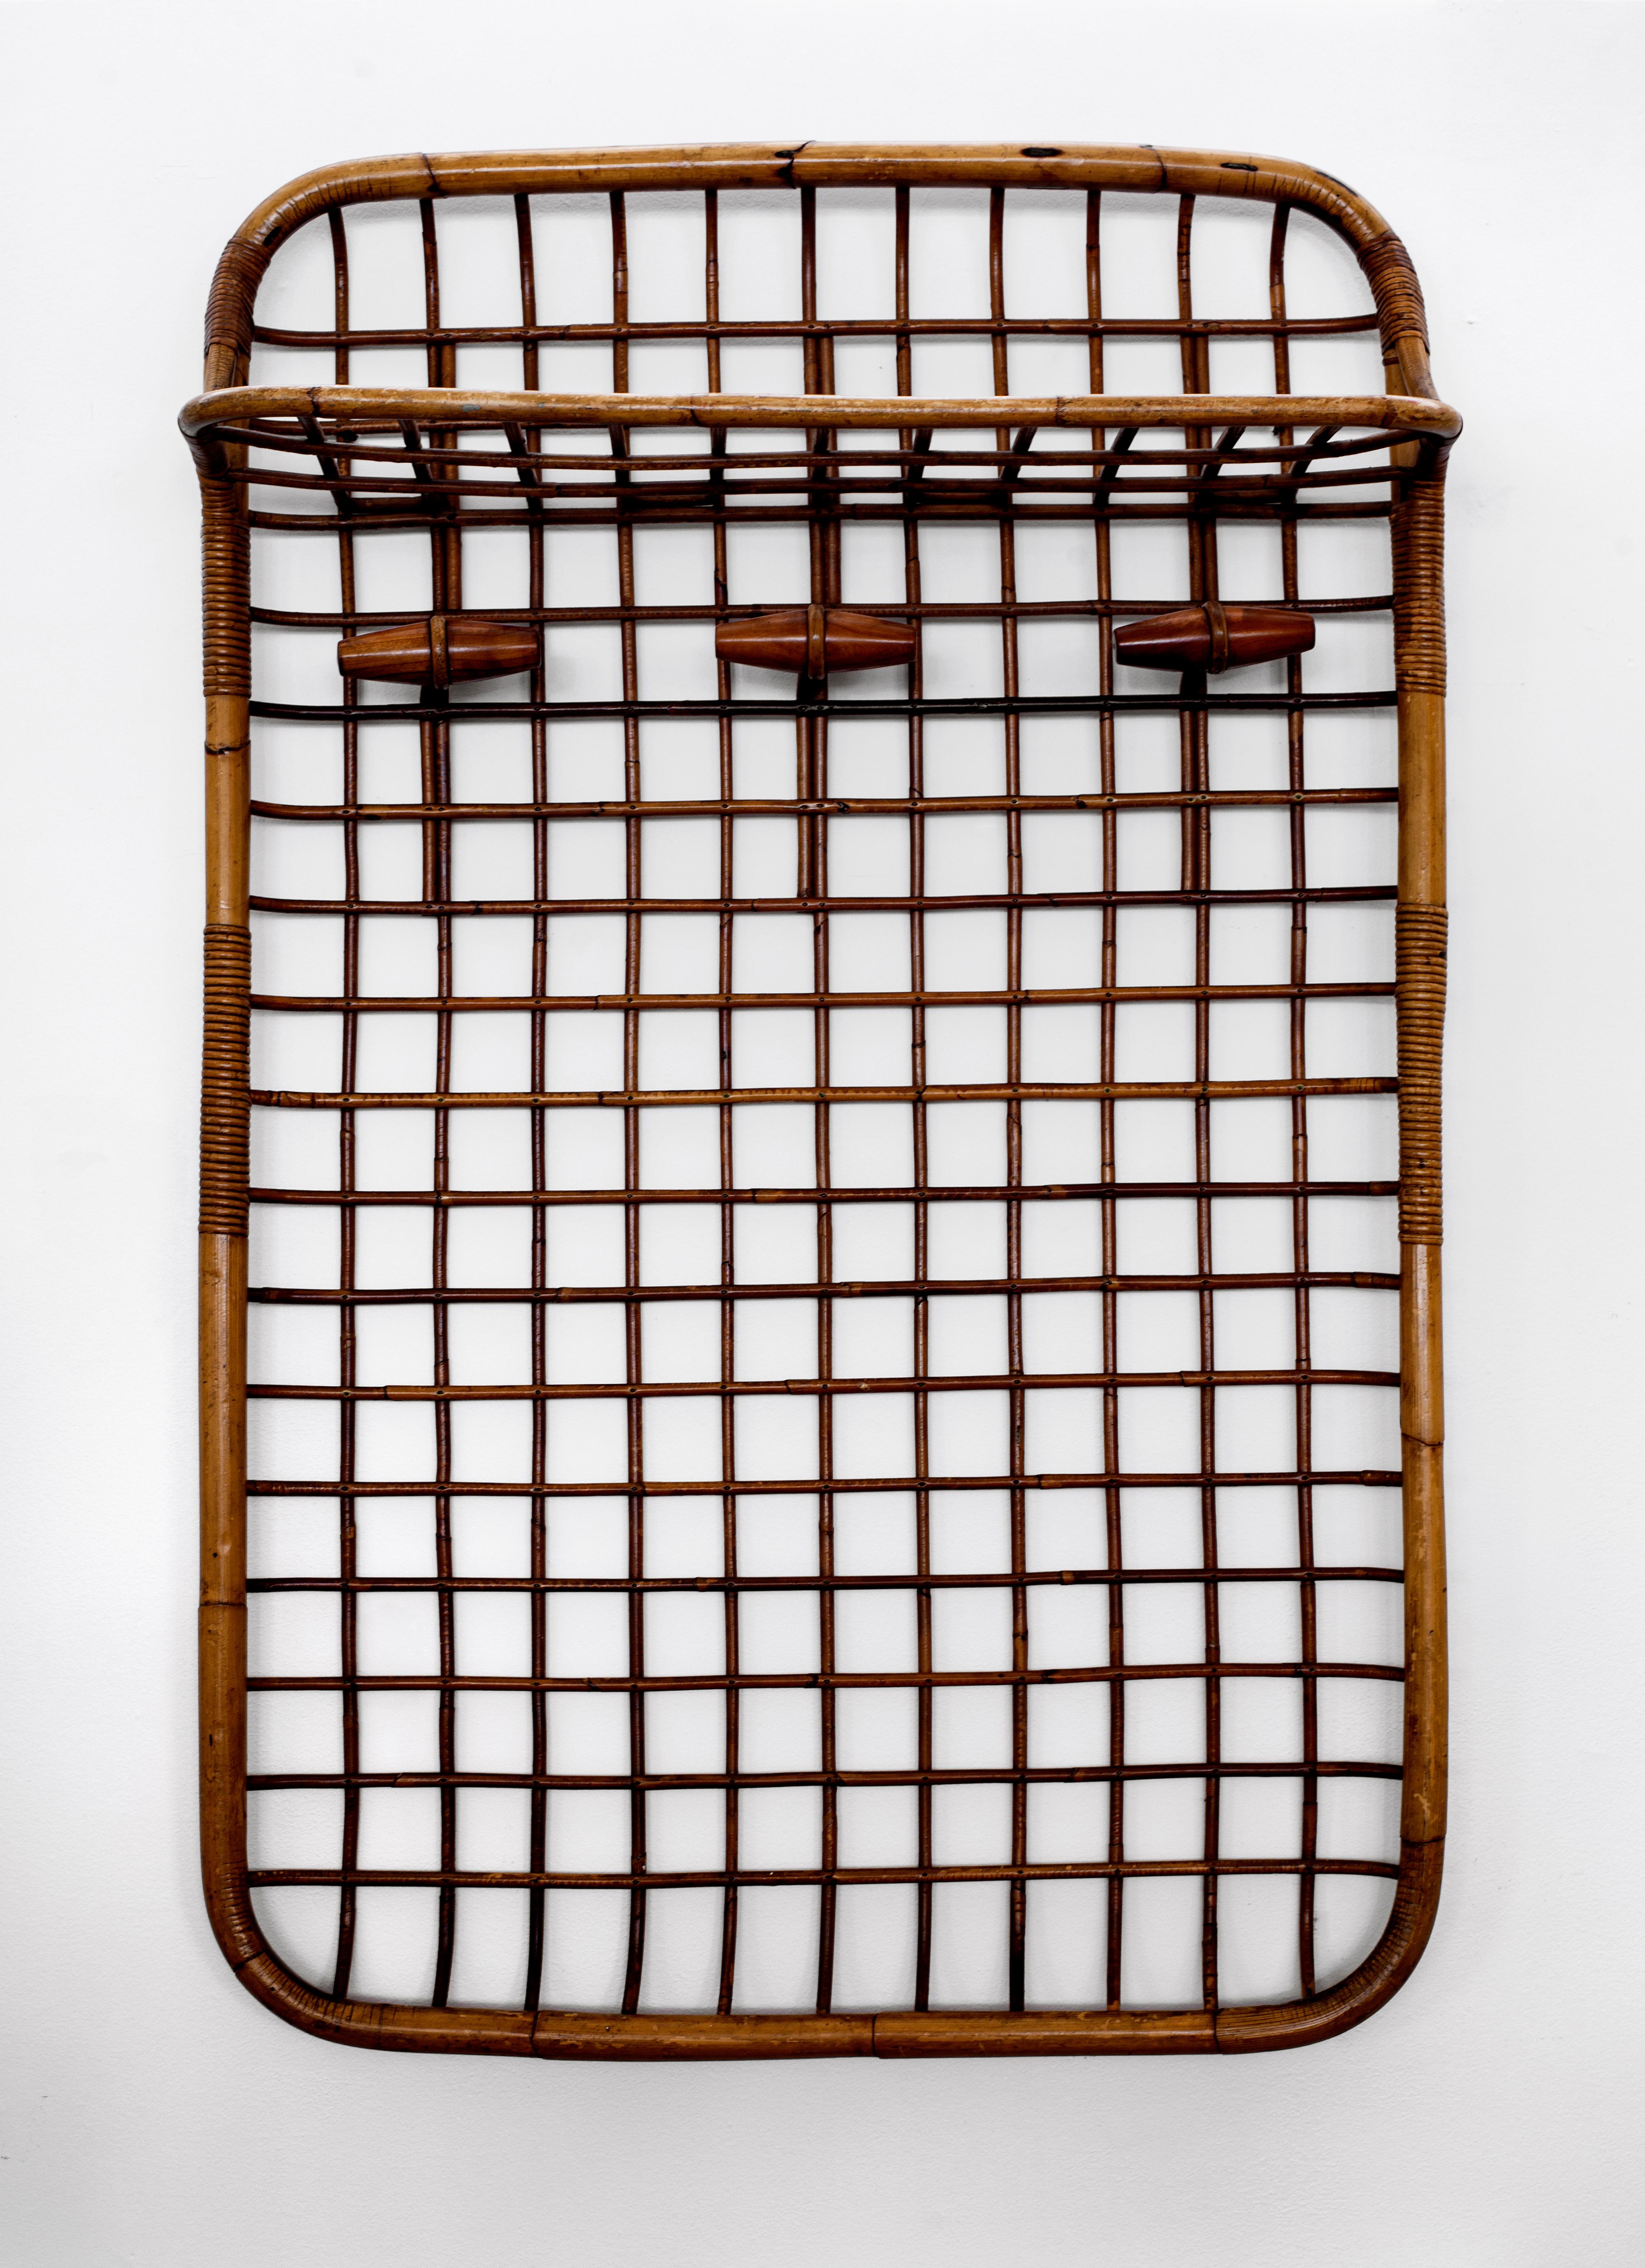 Great rattan wall coat rack by Olaf von Bohr for Bonacina. Rattan and bamboo grid design with upper shelf and 3 wood hooks. Nice patina throughout. Beautiful entry-way or bedroom piece.